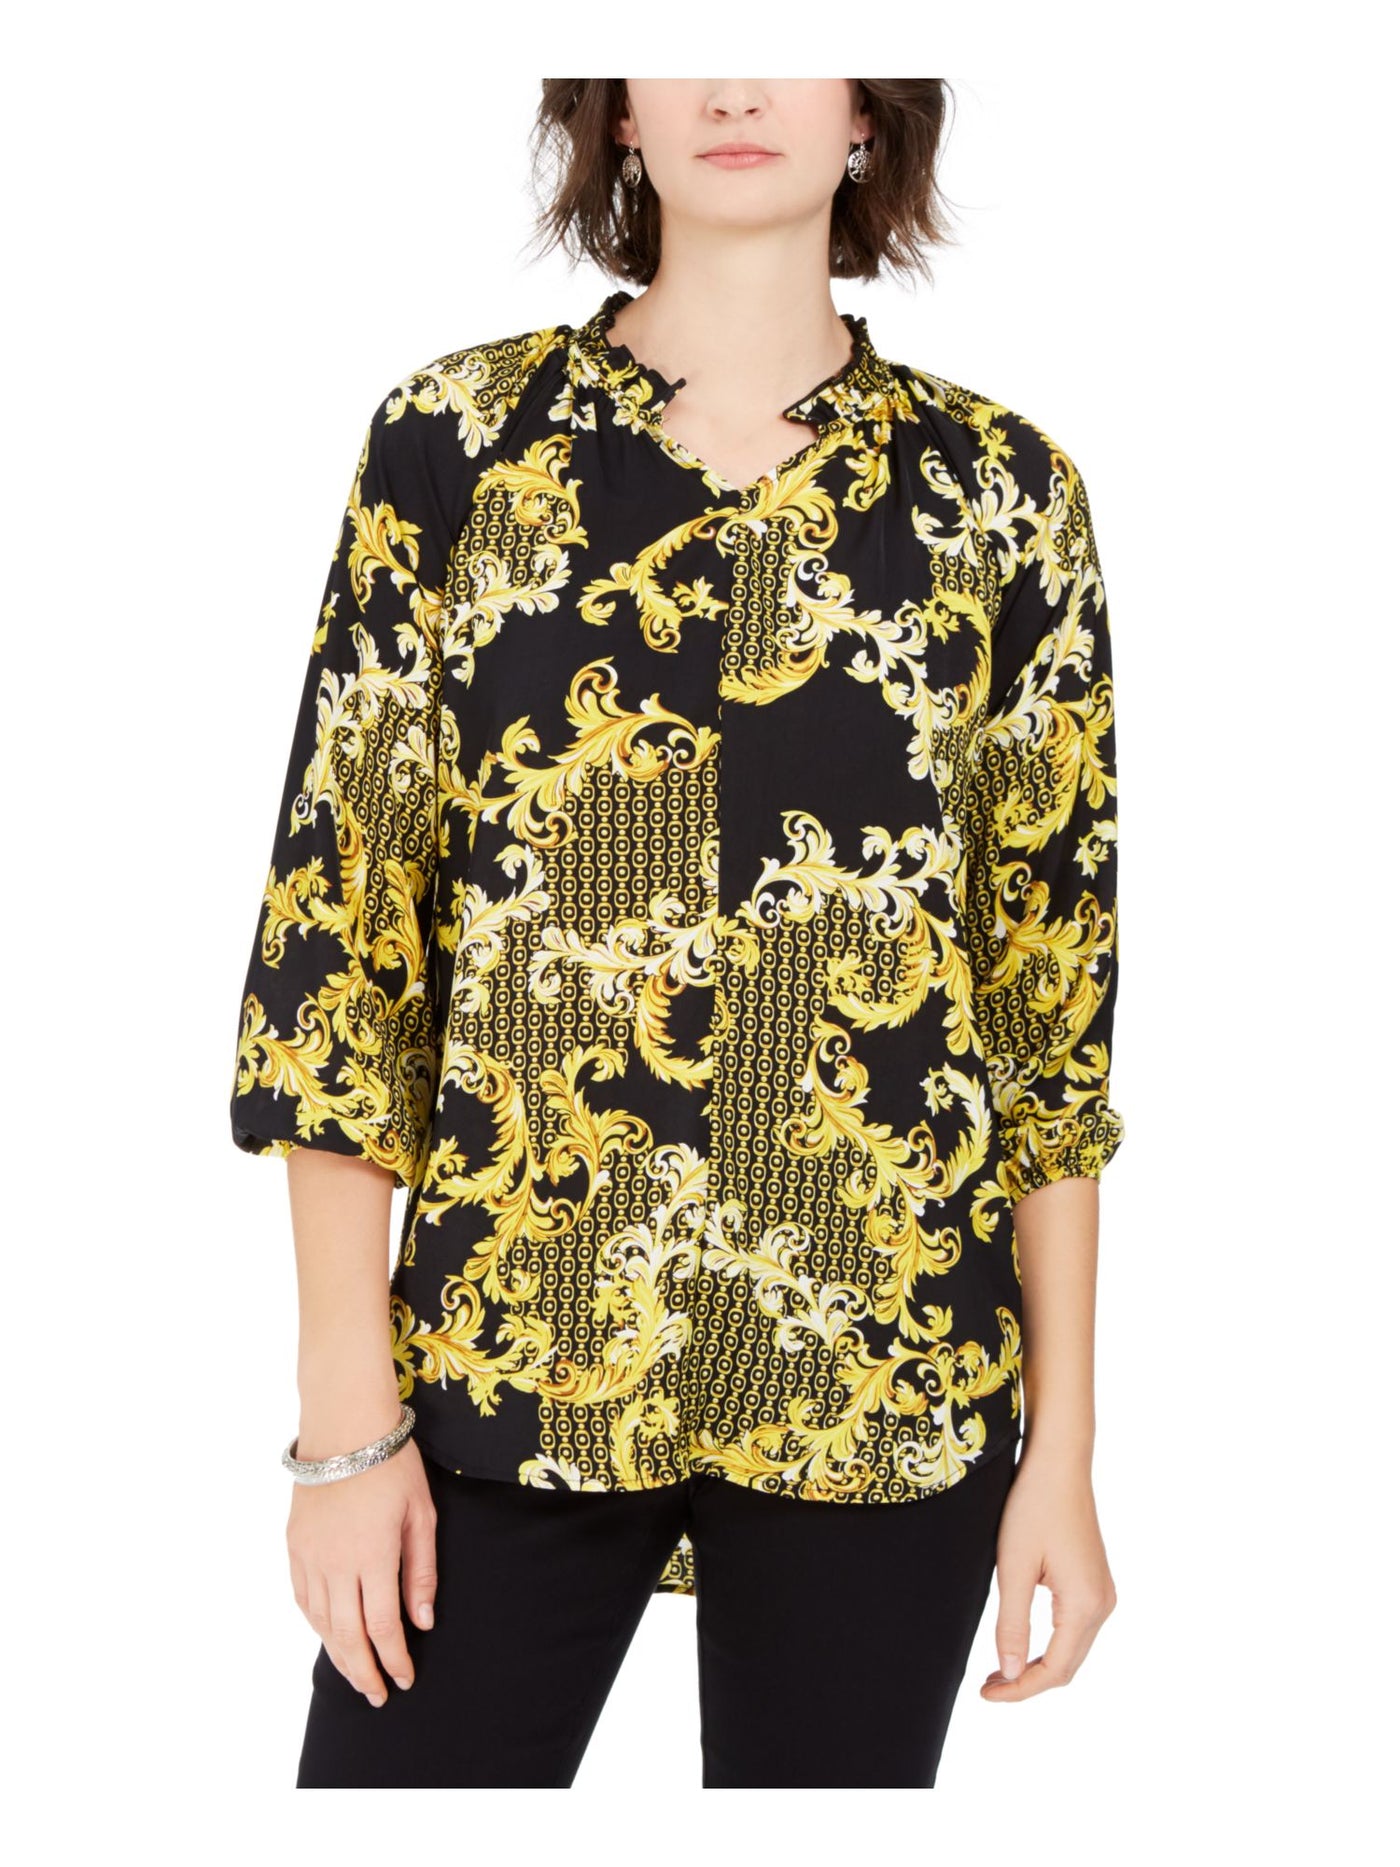 NY COLLECTION Womens Yellow Printed 3/4 Sleeve Mock Evening Hi-Lo Top Petites PXS